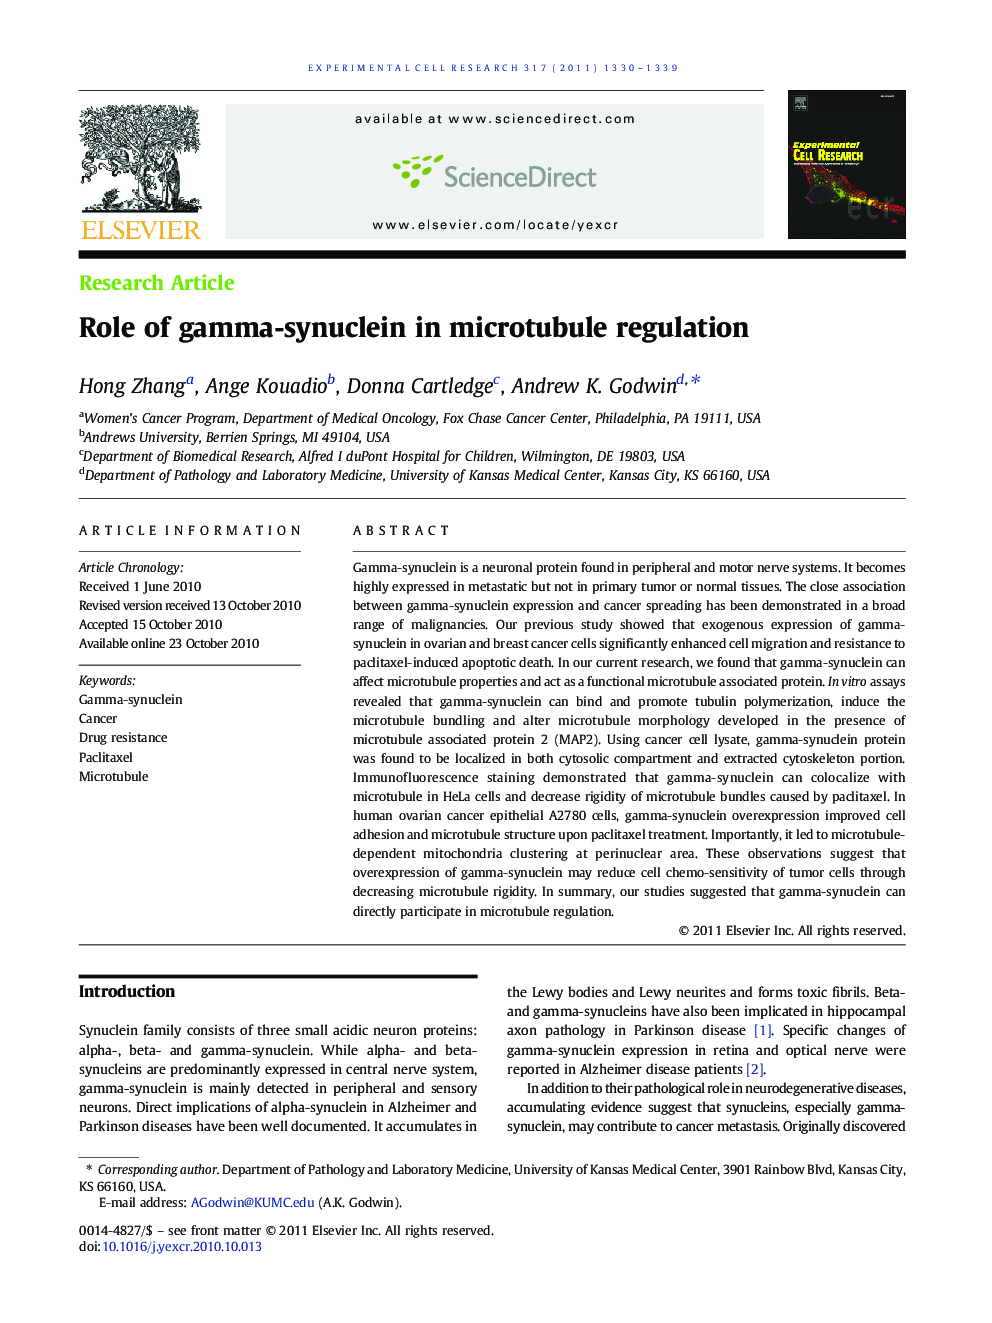 Role of gamma-synuclein in microtubule regulation